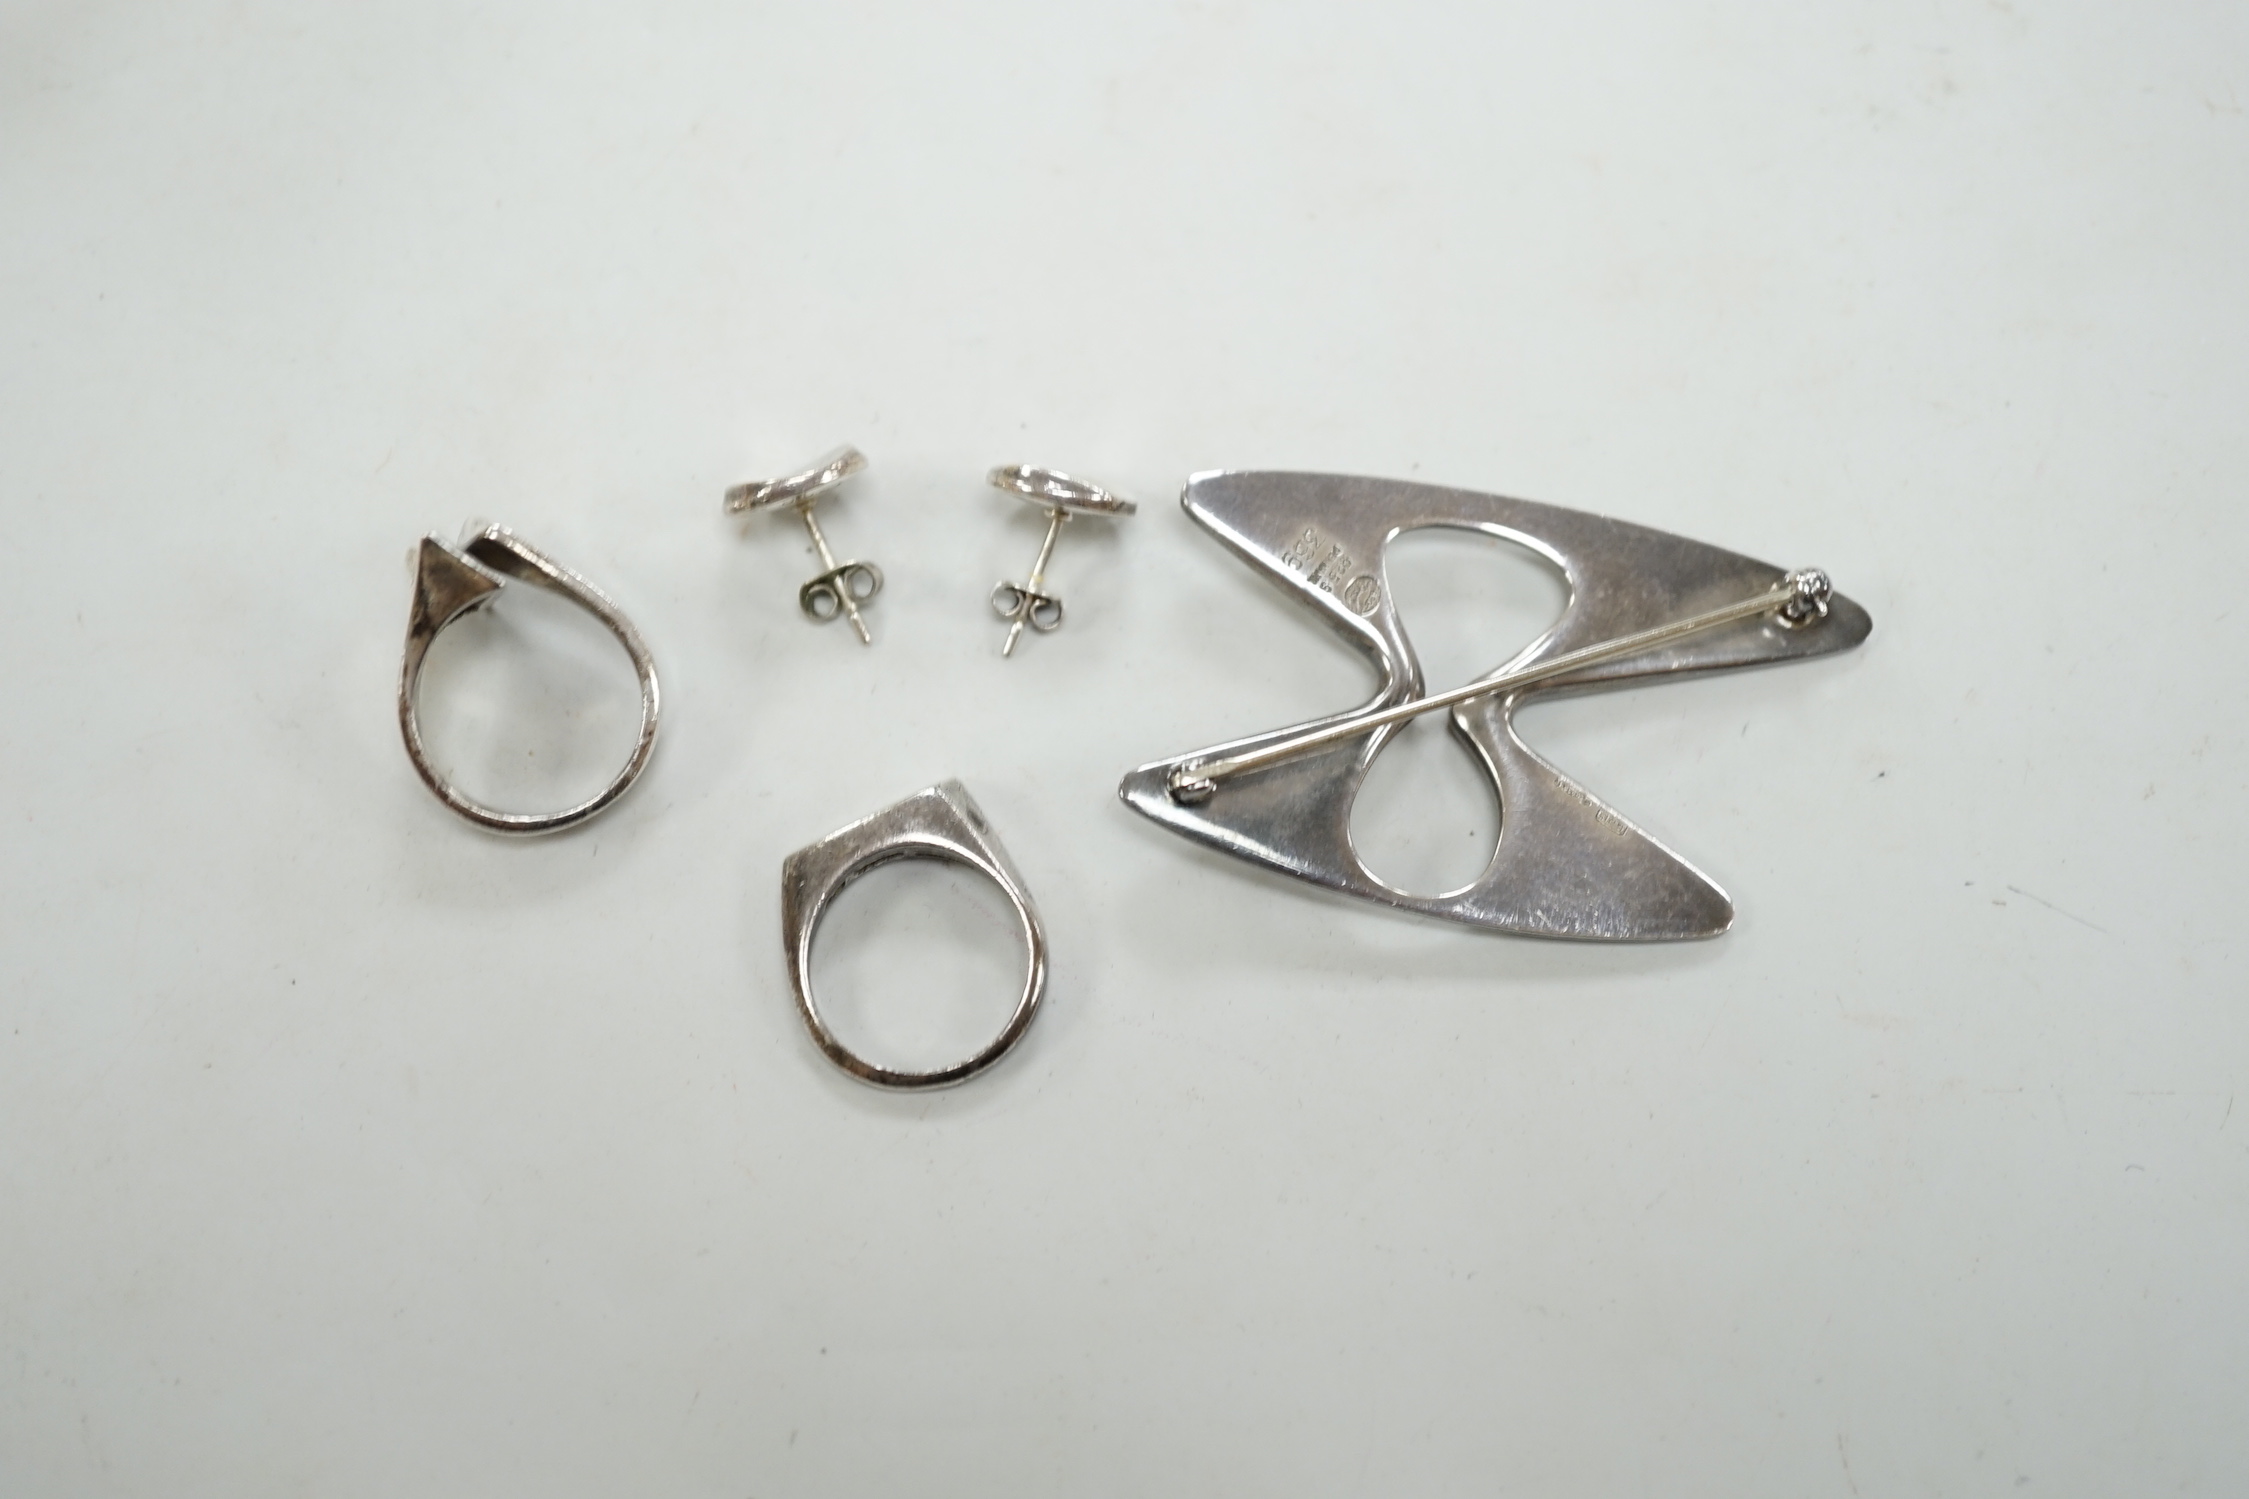 A Georg Jensen sterling free form brooch, design no. 369, a pair of Georg Jensen ear studs and two white metal rings.